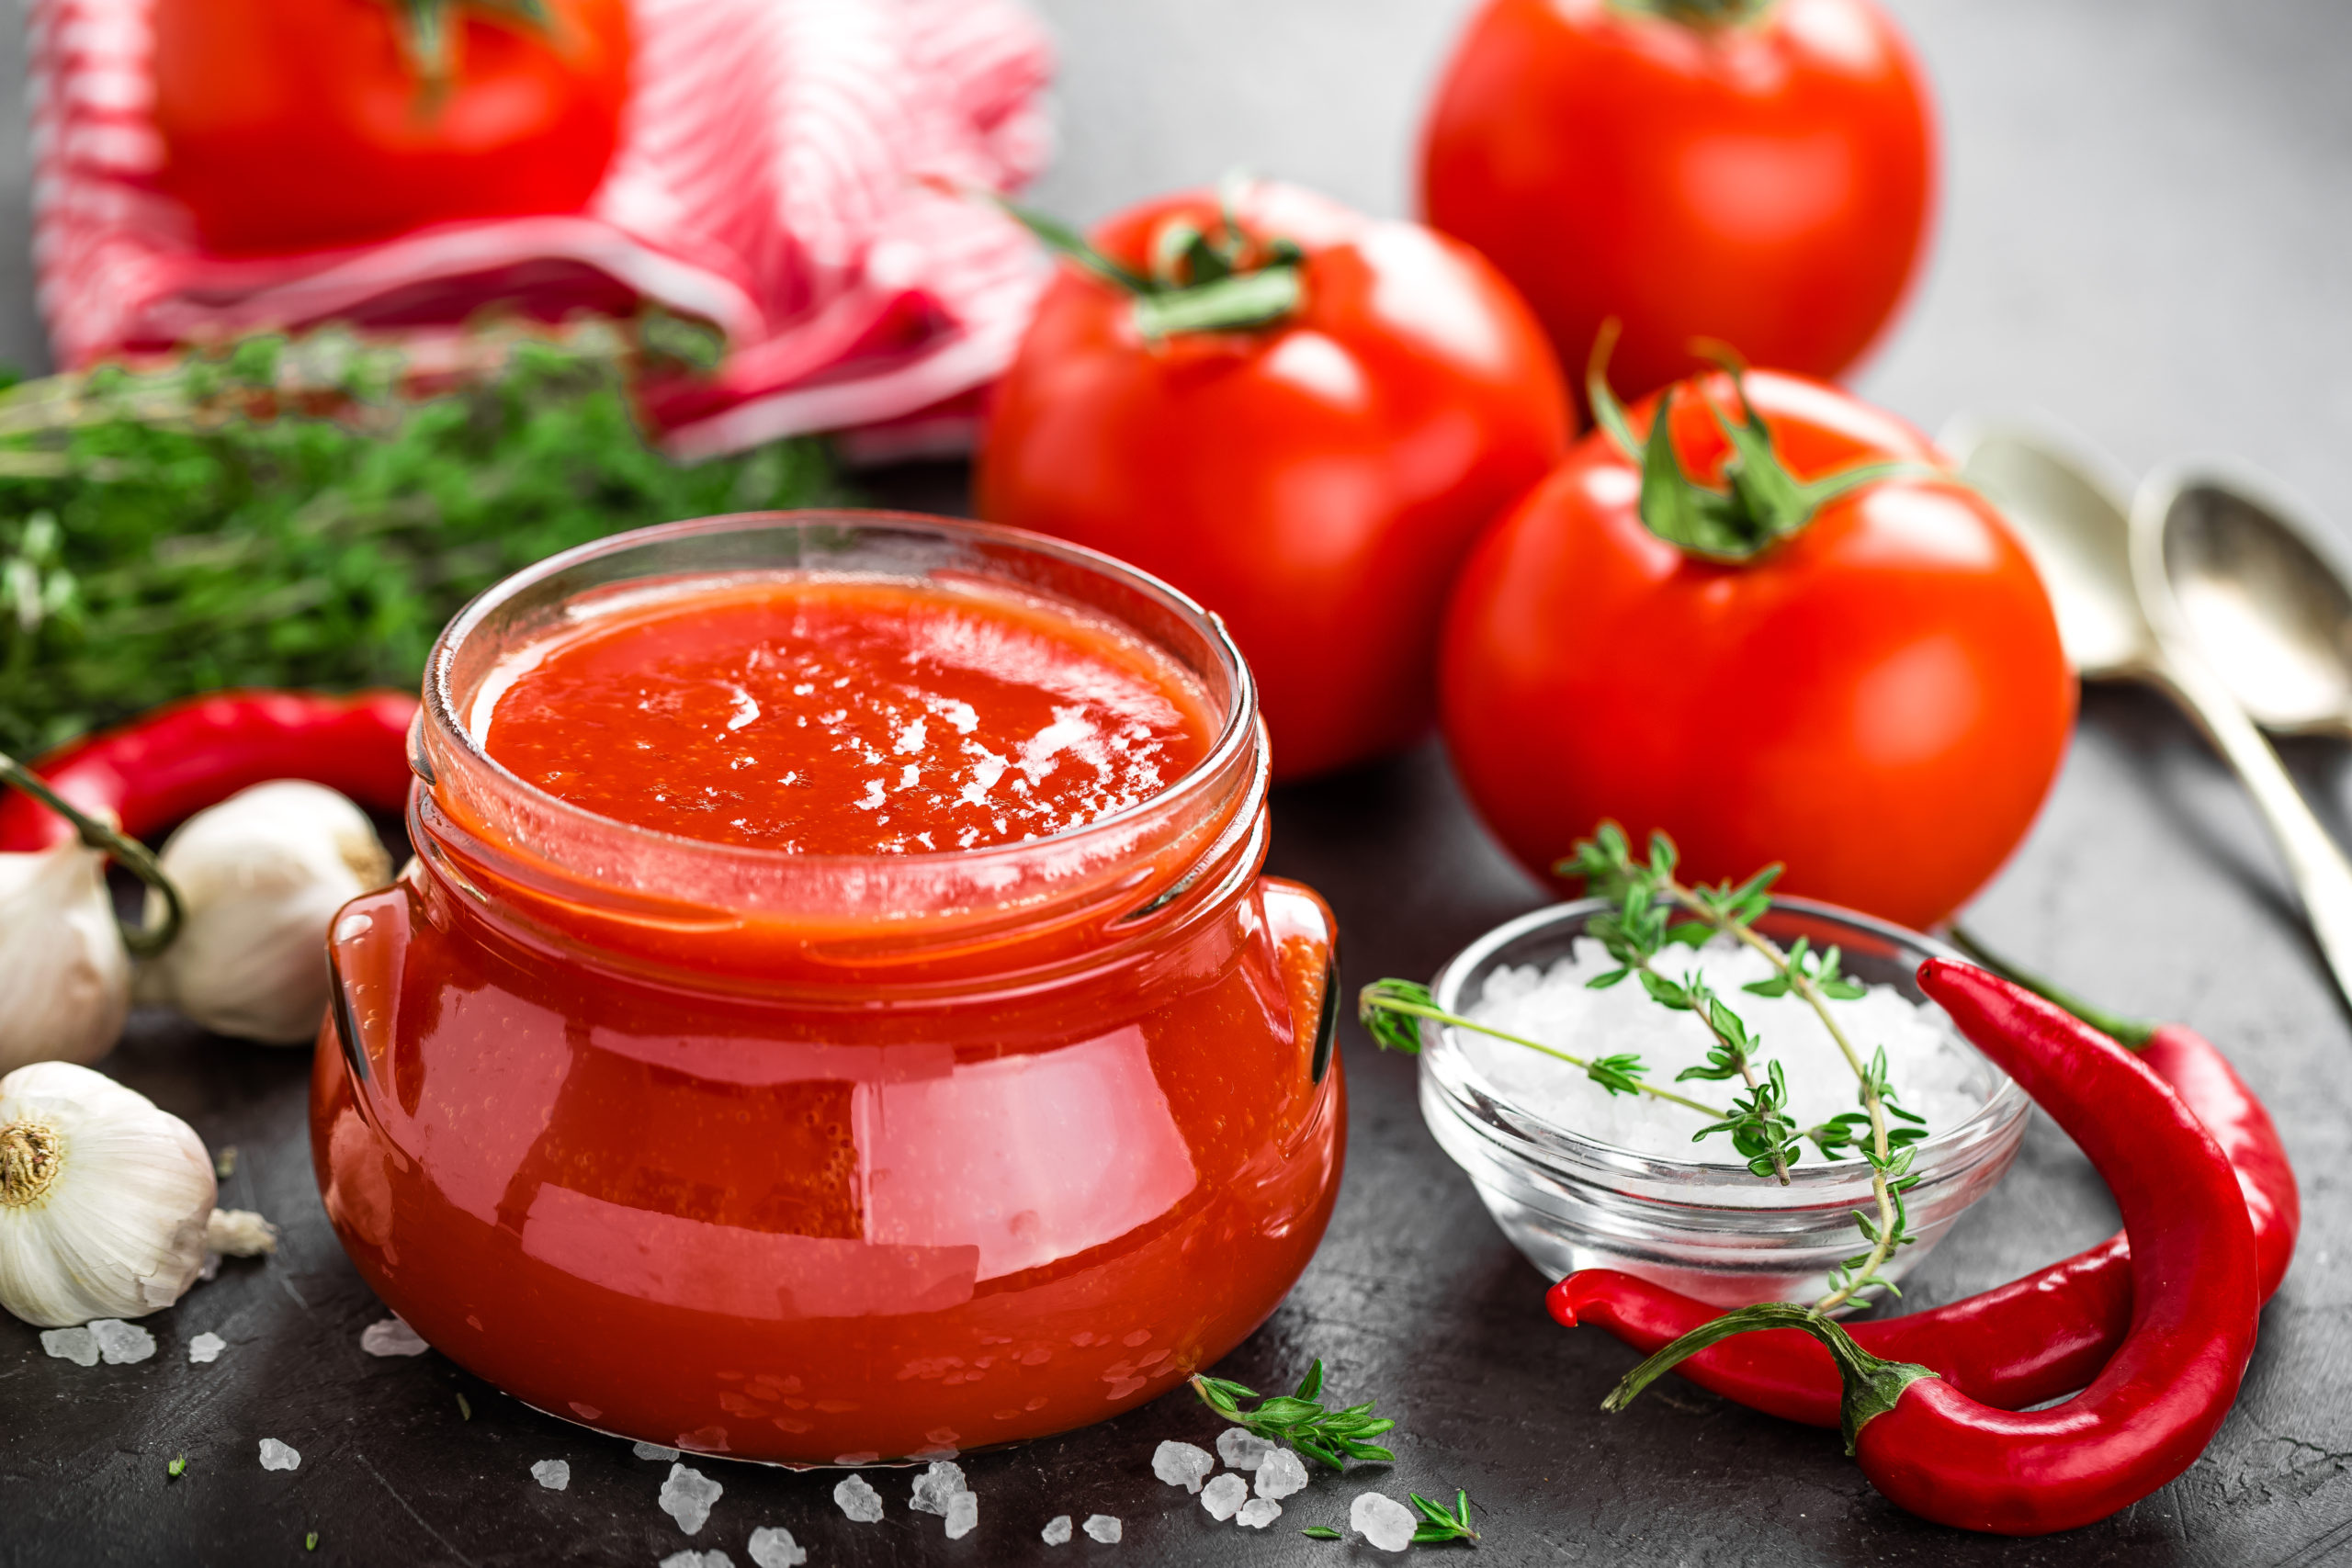 tomato-paste-puree-in-glass-jar-and-fresh-tomatos-PSFRQ29-scaled